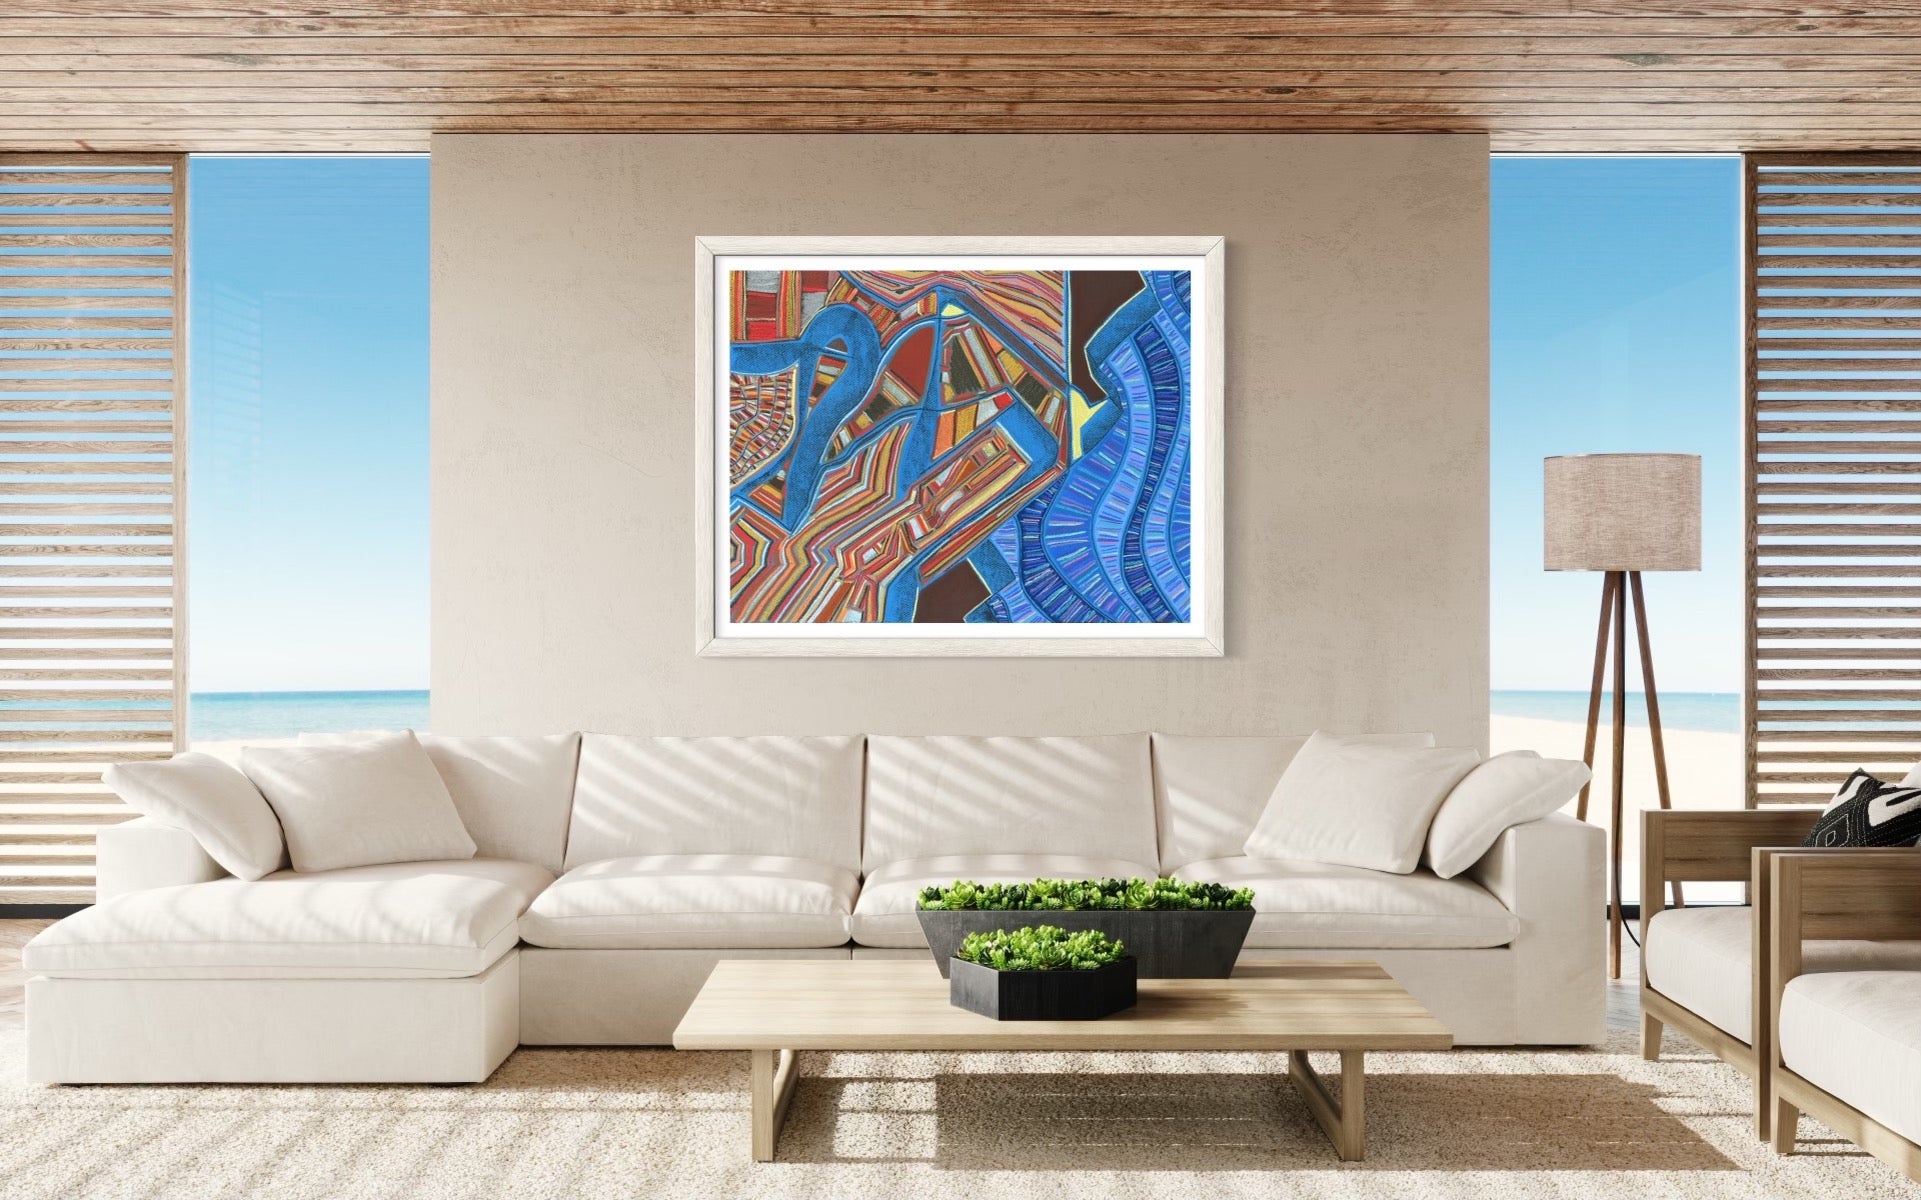 Manitou Messenger artwork in a Beautiful room with original art shown as Giclee print on wall